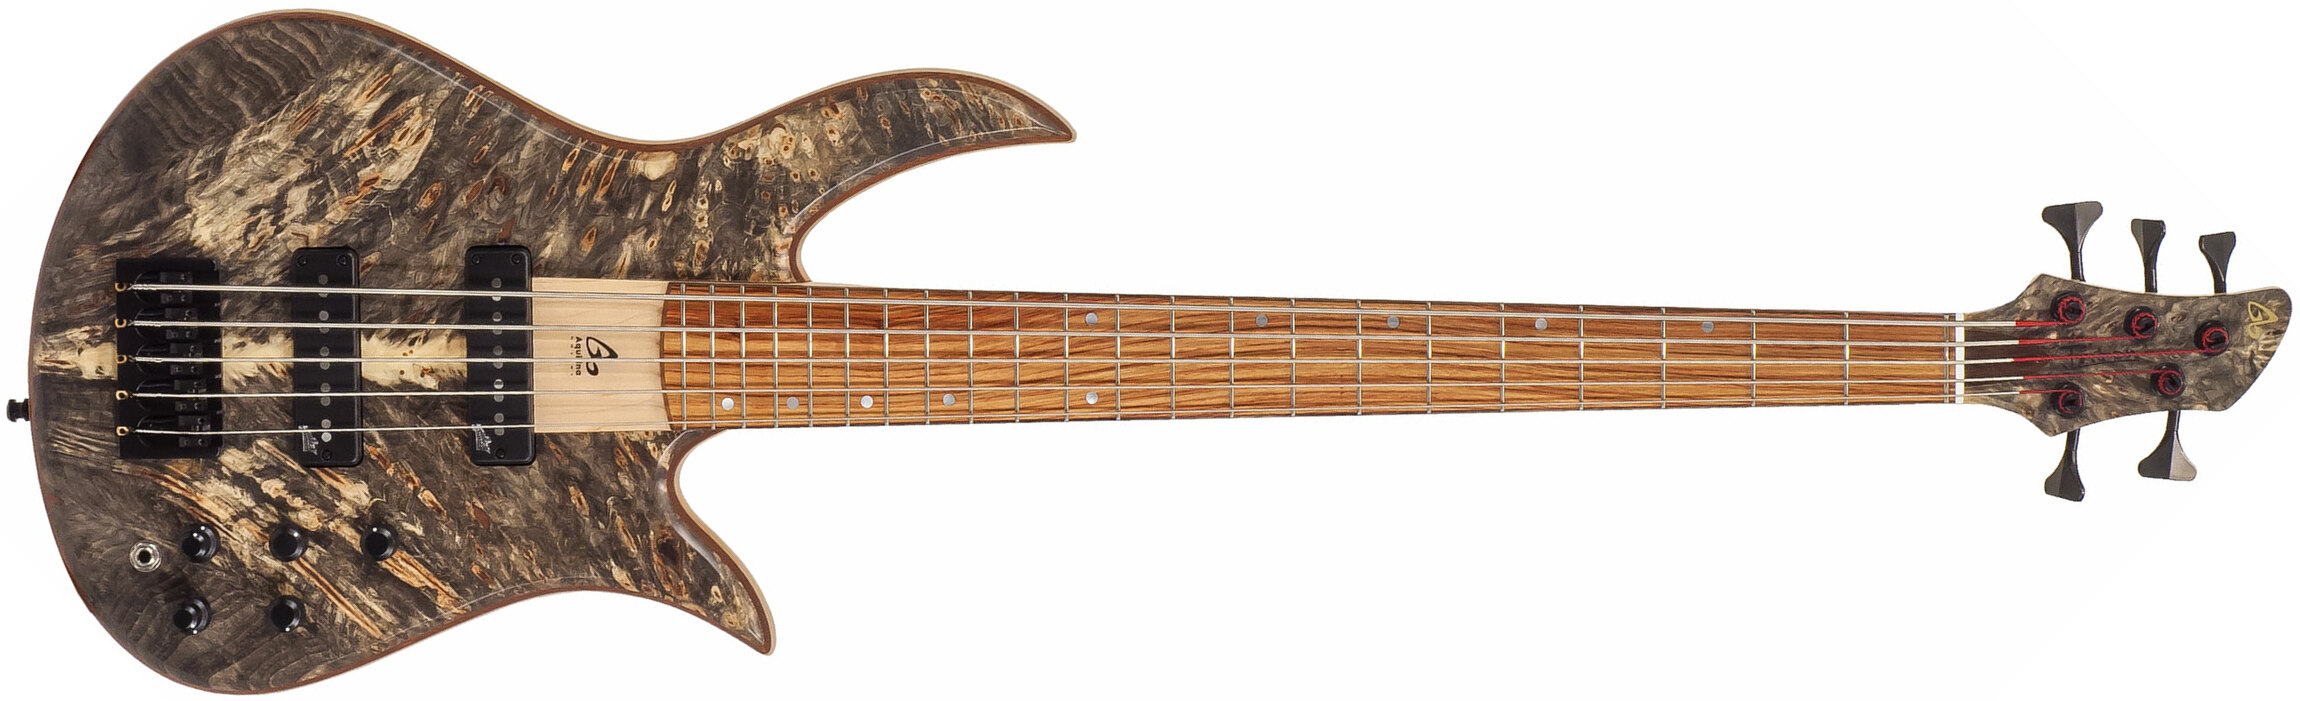 Aquilina Triton 5 Aulne/frene Active - Buckeyes Burl - Solid body electric bass - Main picture